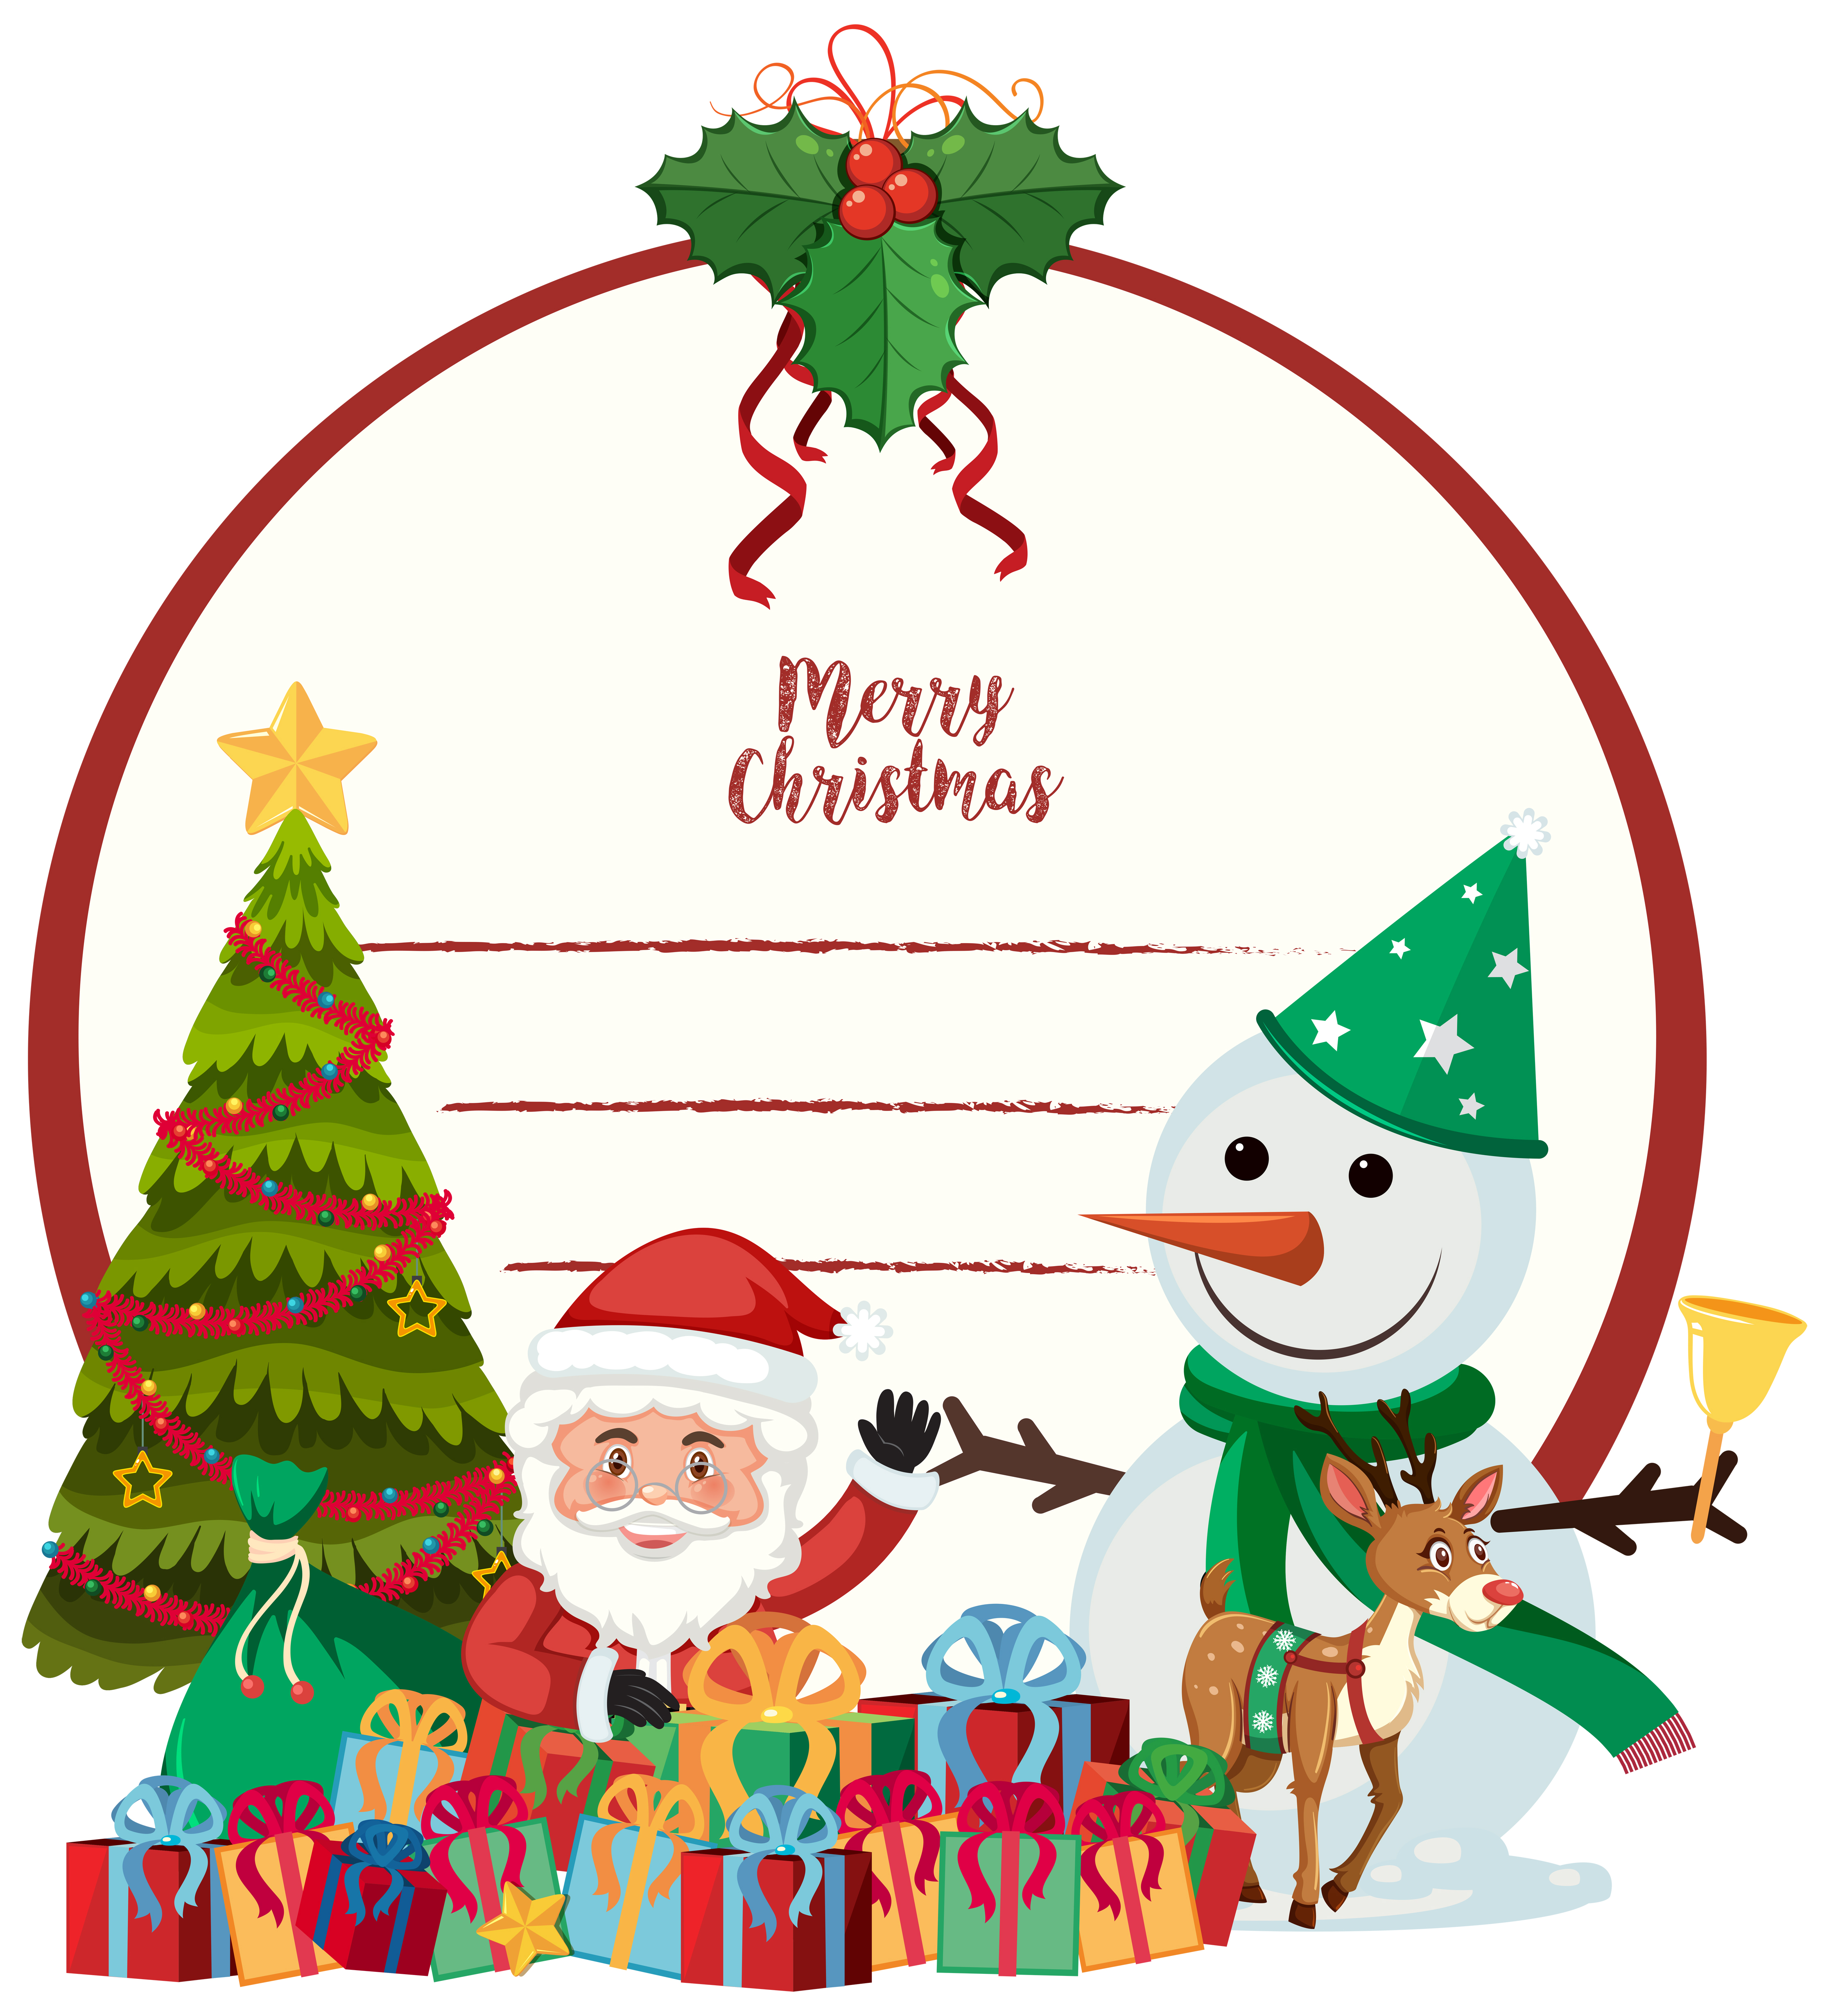 A merry christmas card template Download Free Vectors, Clipart